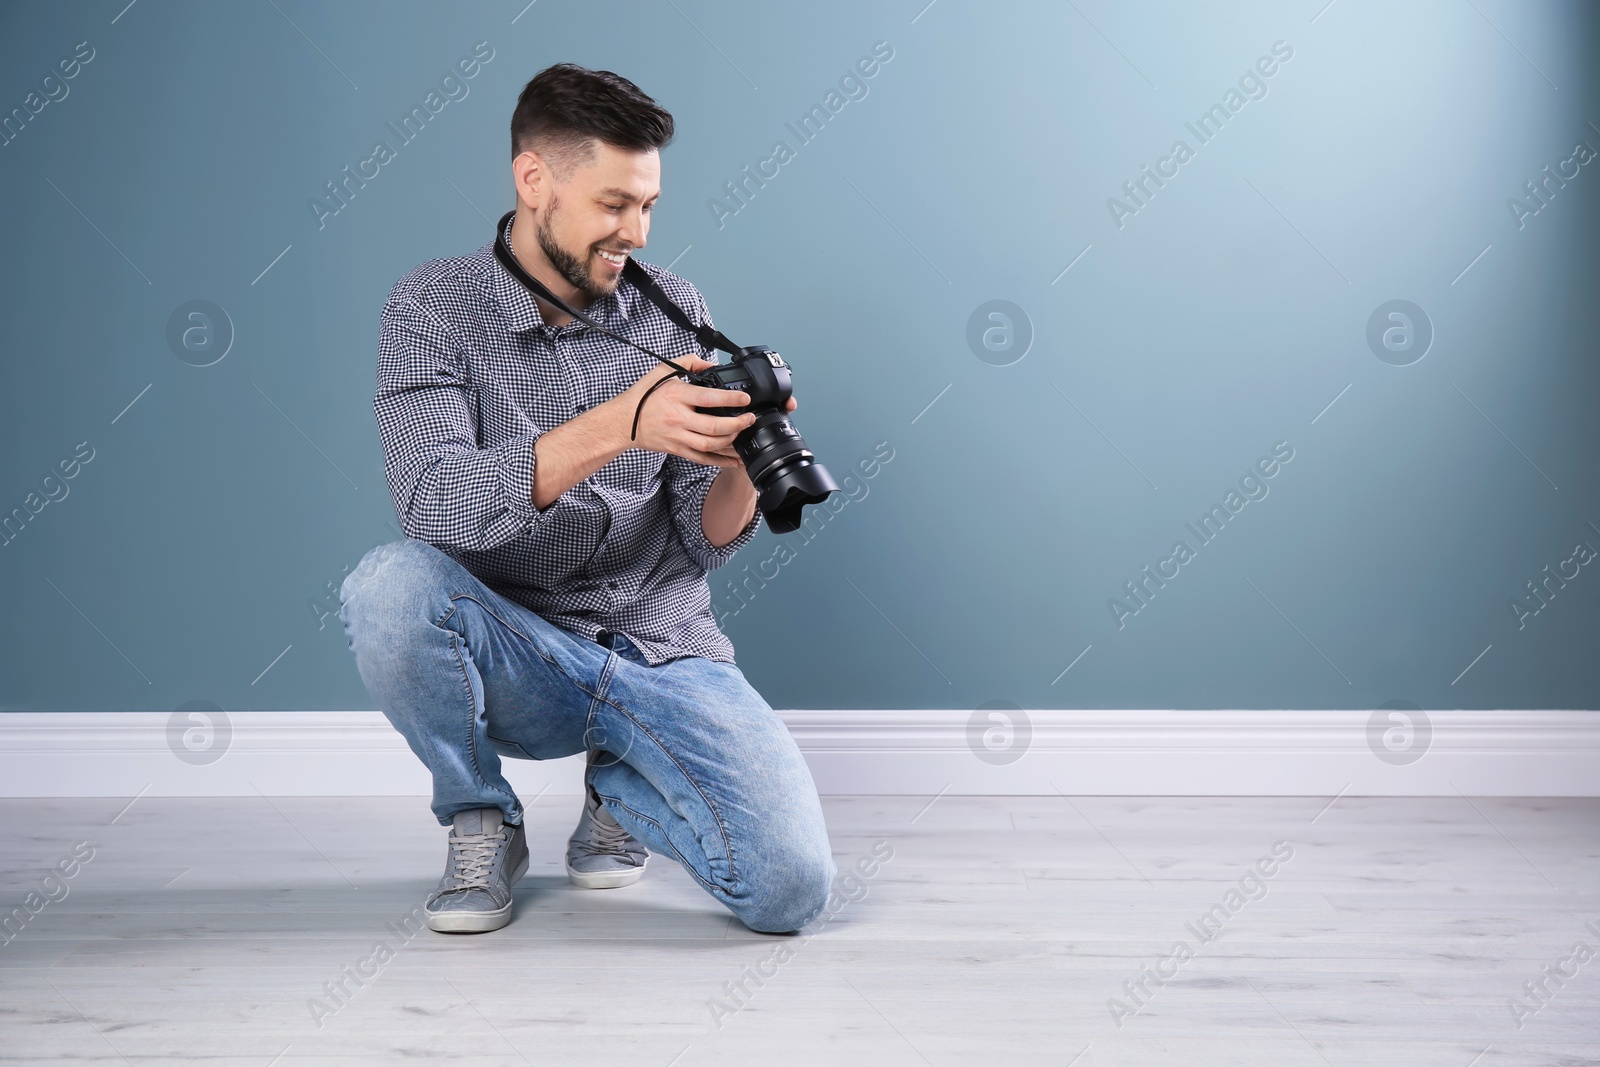 Photo of Male photographer with camera near grey wall